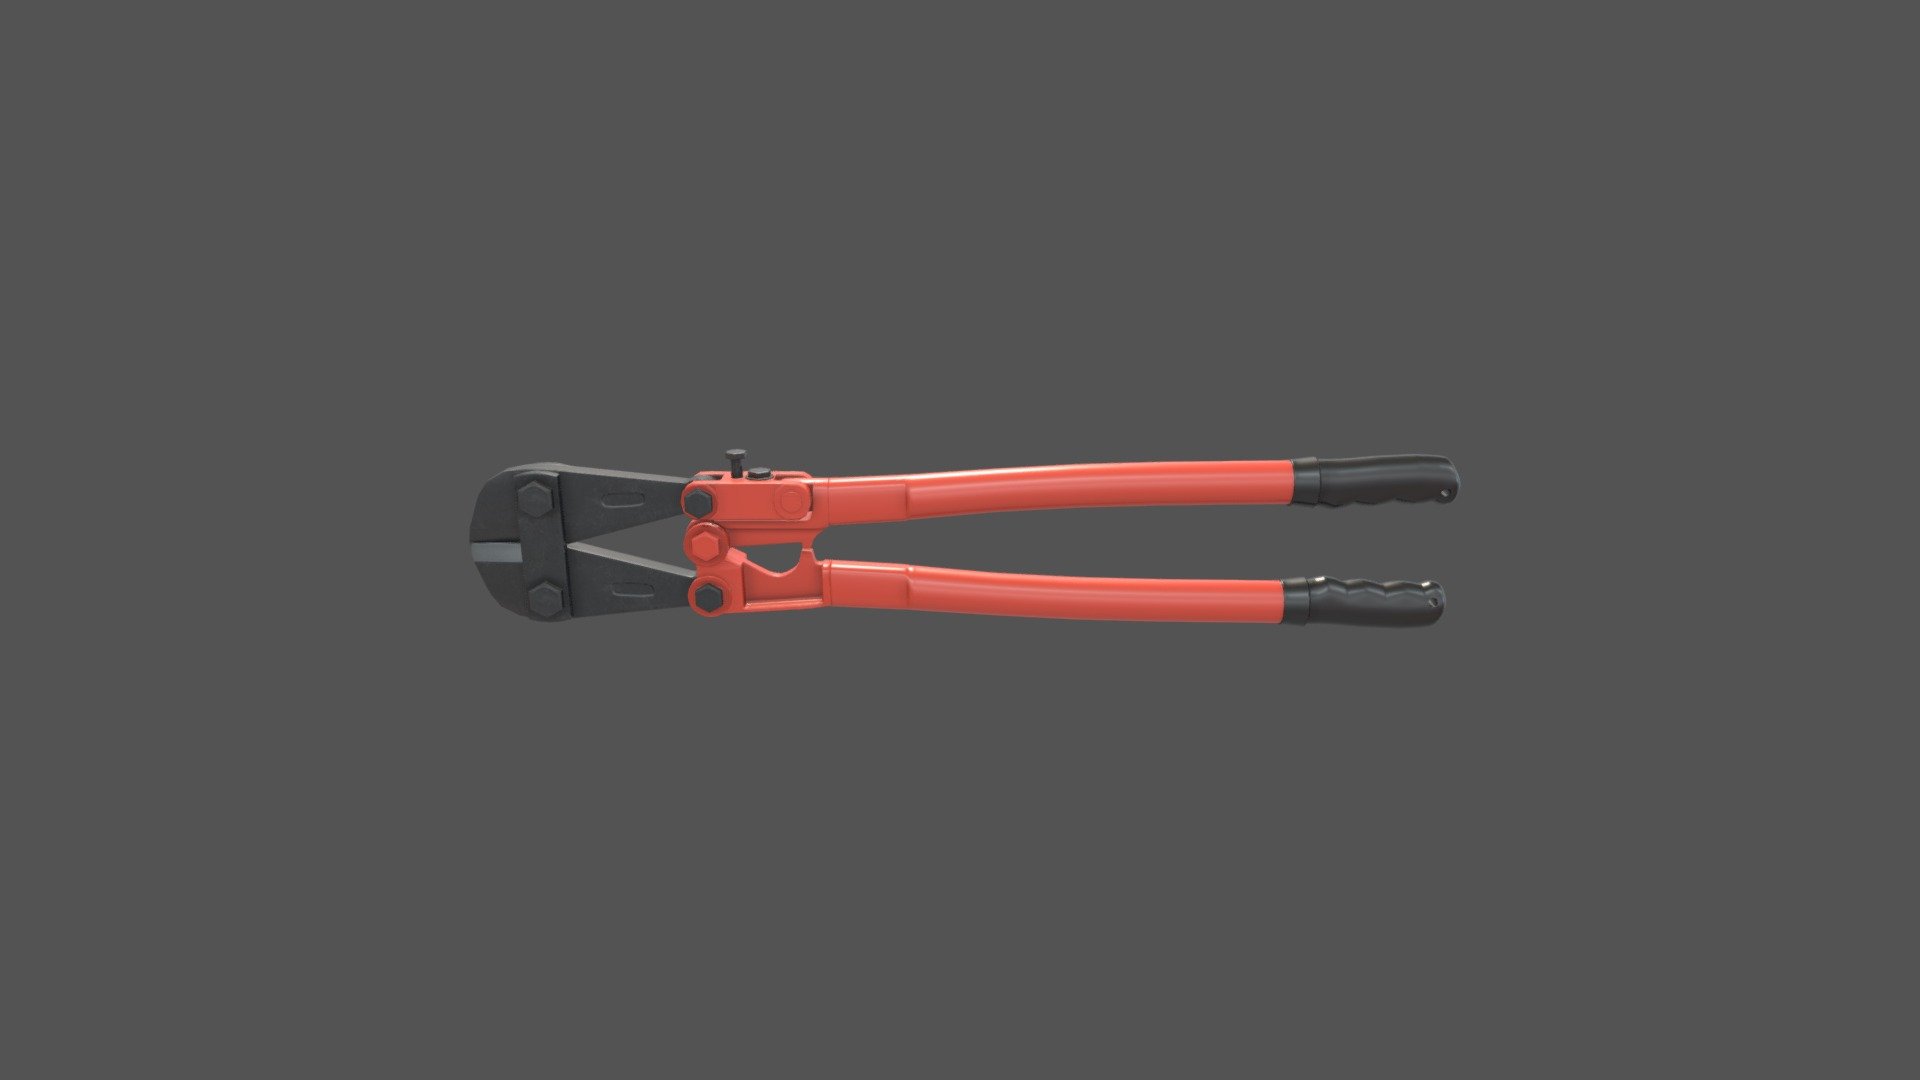 Game res model of a pair of bolt cutters I started working on.  Both the normal map and ambient occlusion are baked on plus the base color is added.  The next step is to finish the rest of the texturing 3d model